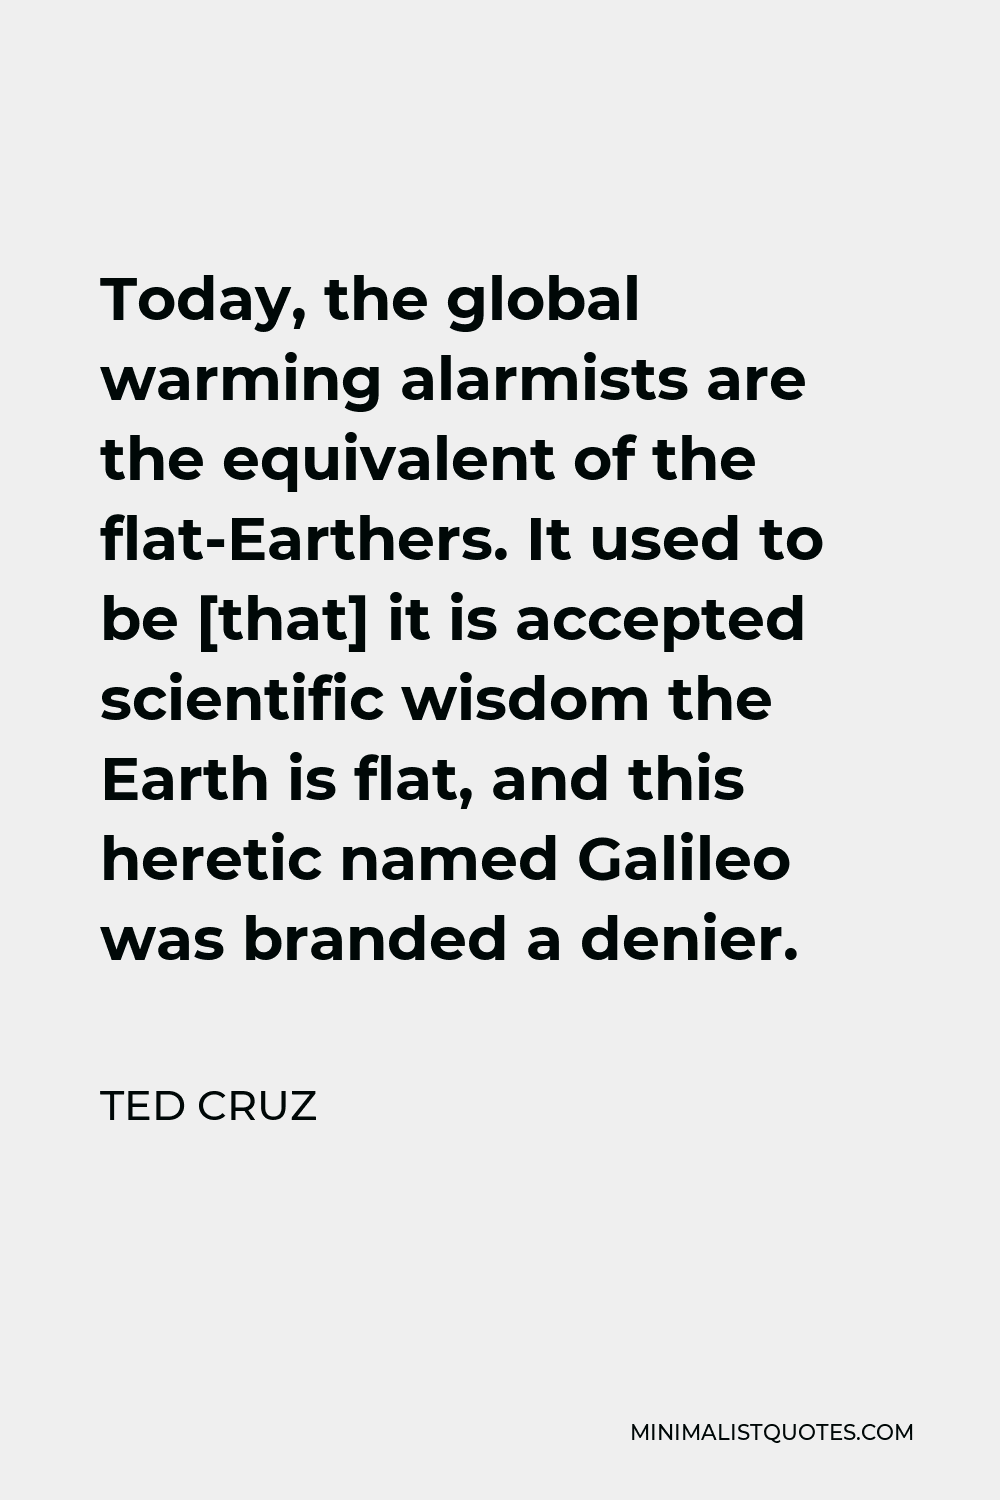 Ted Cruz Quote - Today, the global warming alarmists are the equivalent of the flat-Earthers. It used to be [that] it is accepted scientific wisdom the Earth is flat, and this heretic named Galileo was branded a denier.